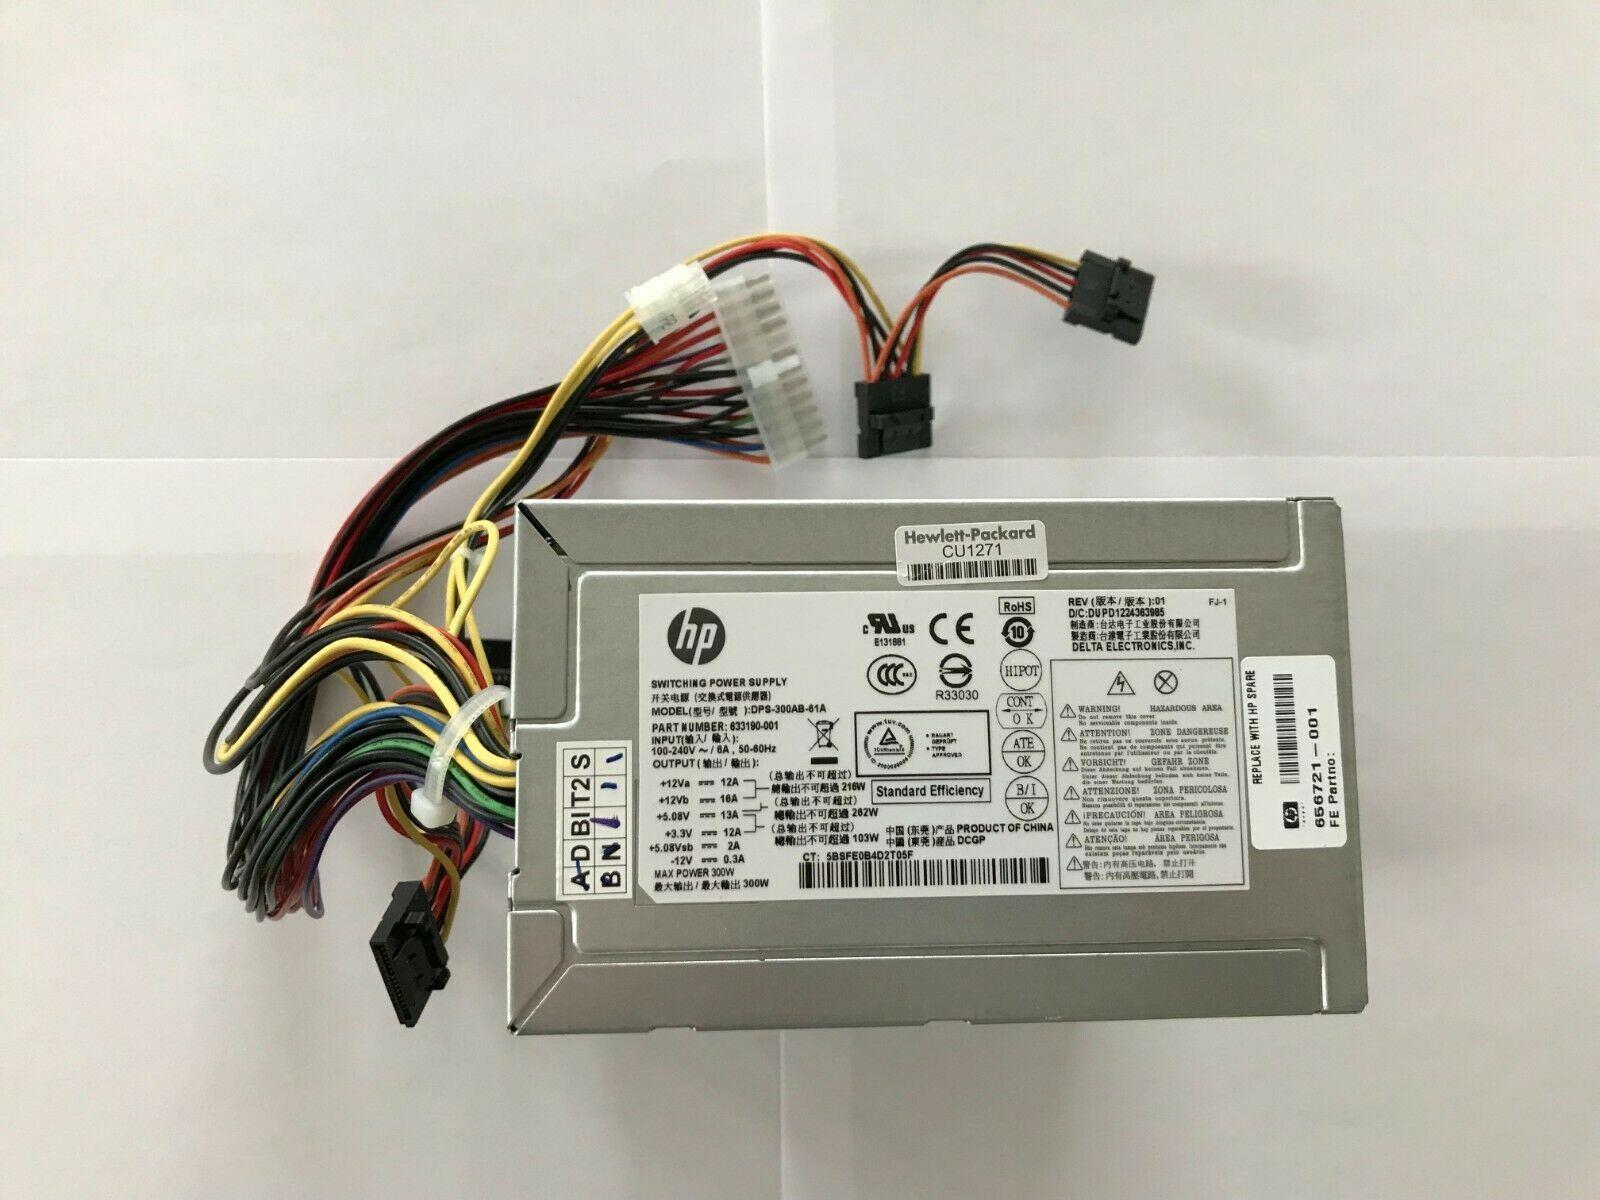 DPS 300AB 61A 633190 001 656721 001 power supply unit psu rated at 300 watts active power factor correction pfc merlot e not for use in brazil